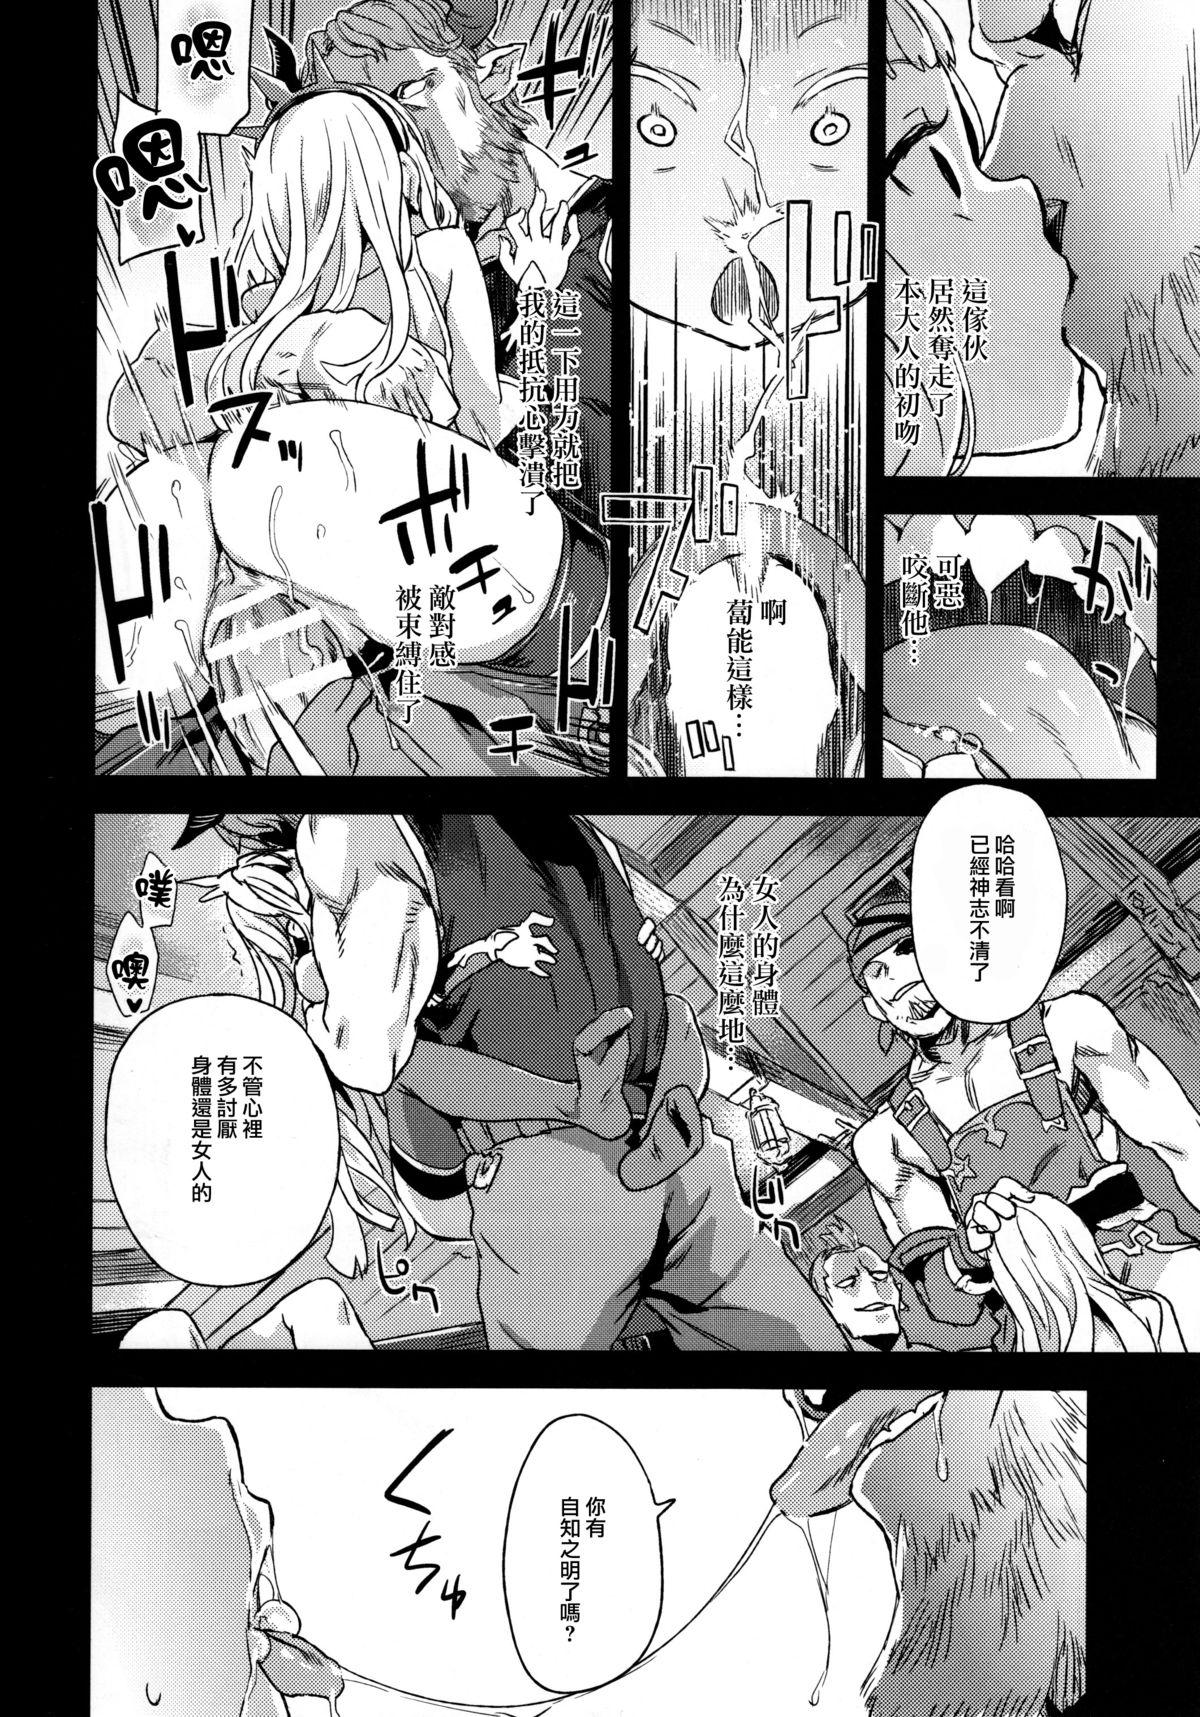 Read hentai Victim Girls 20 THE COLLAPSE OF CAGLIOSTRO Page 16 Of 36 ...